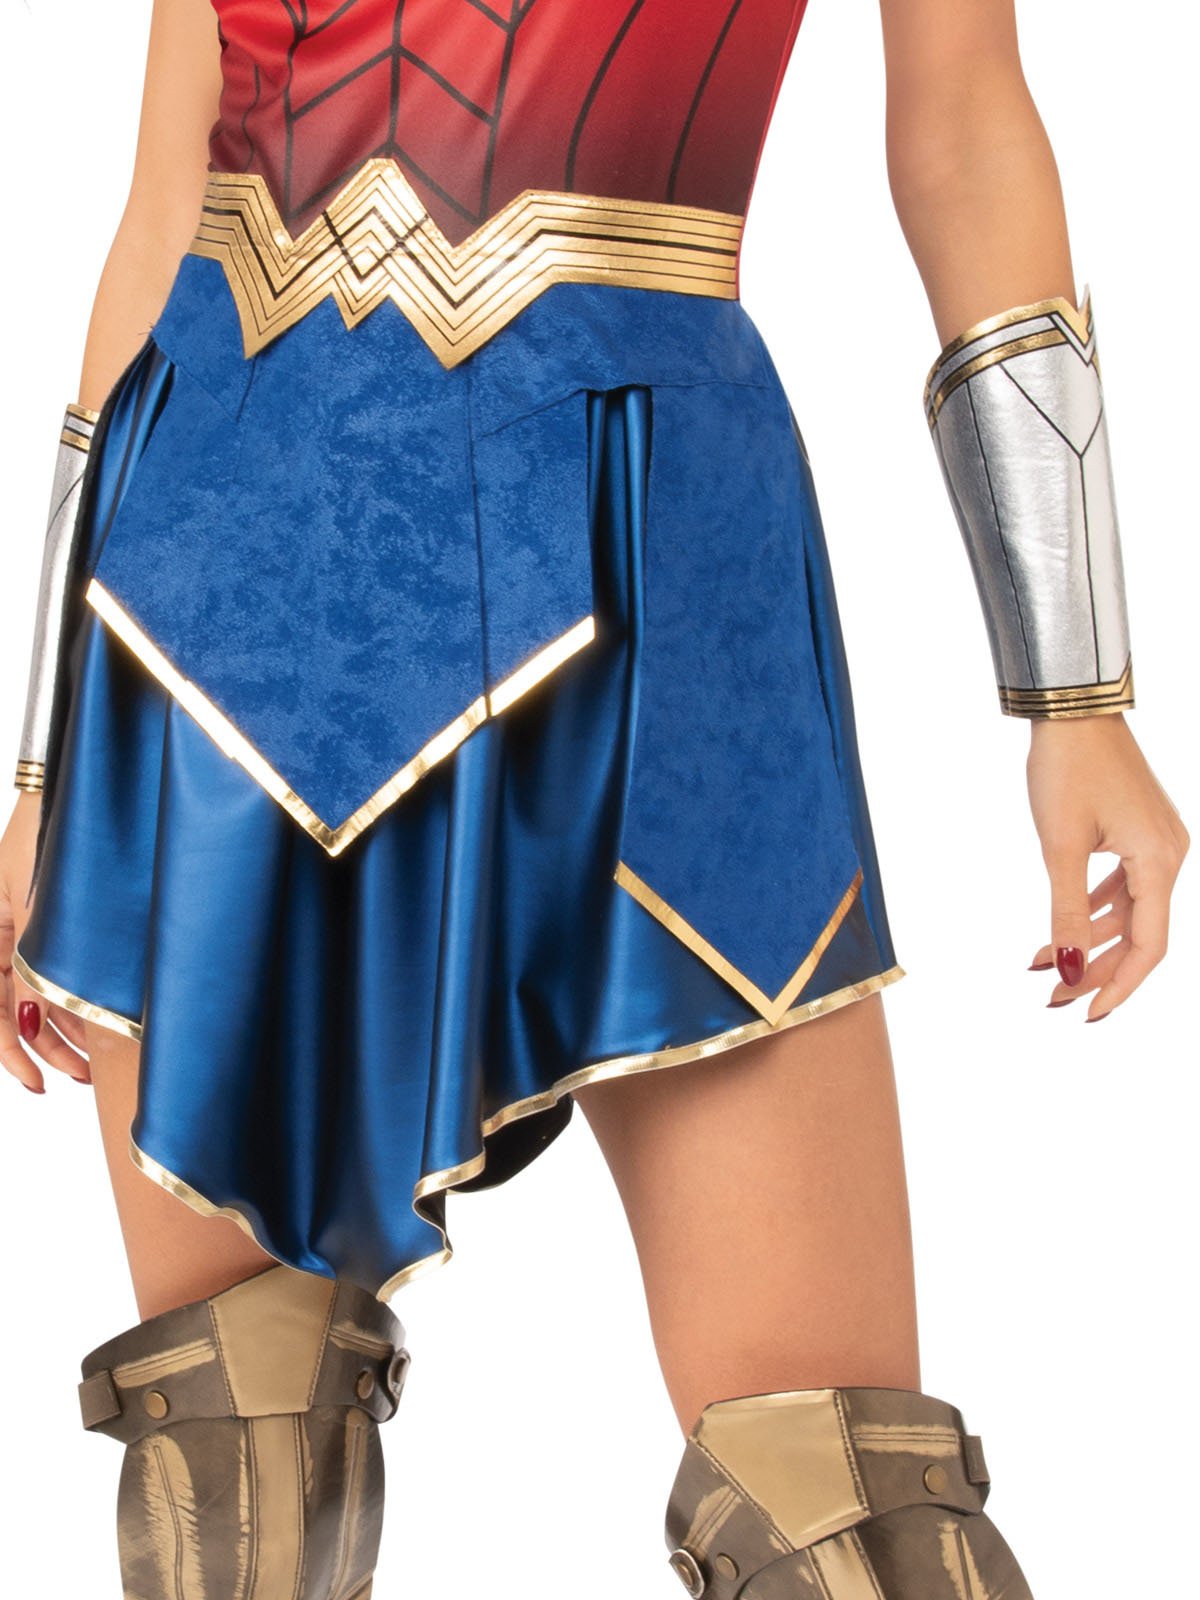 Costume Adult Wonder Woman 1984 Deluxe Small